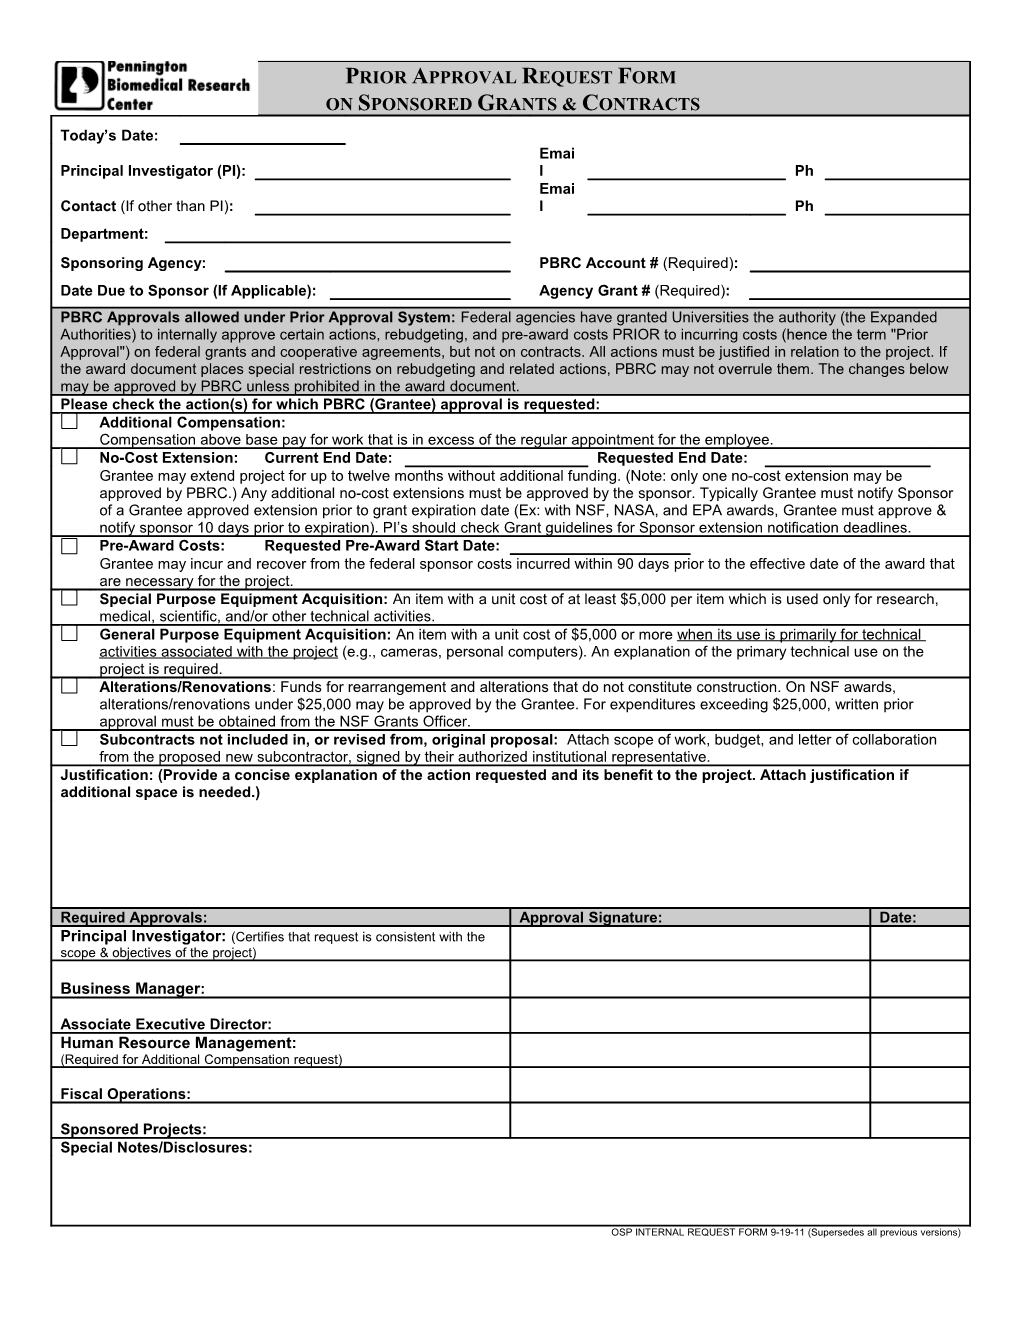 Prior Approval Request Form